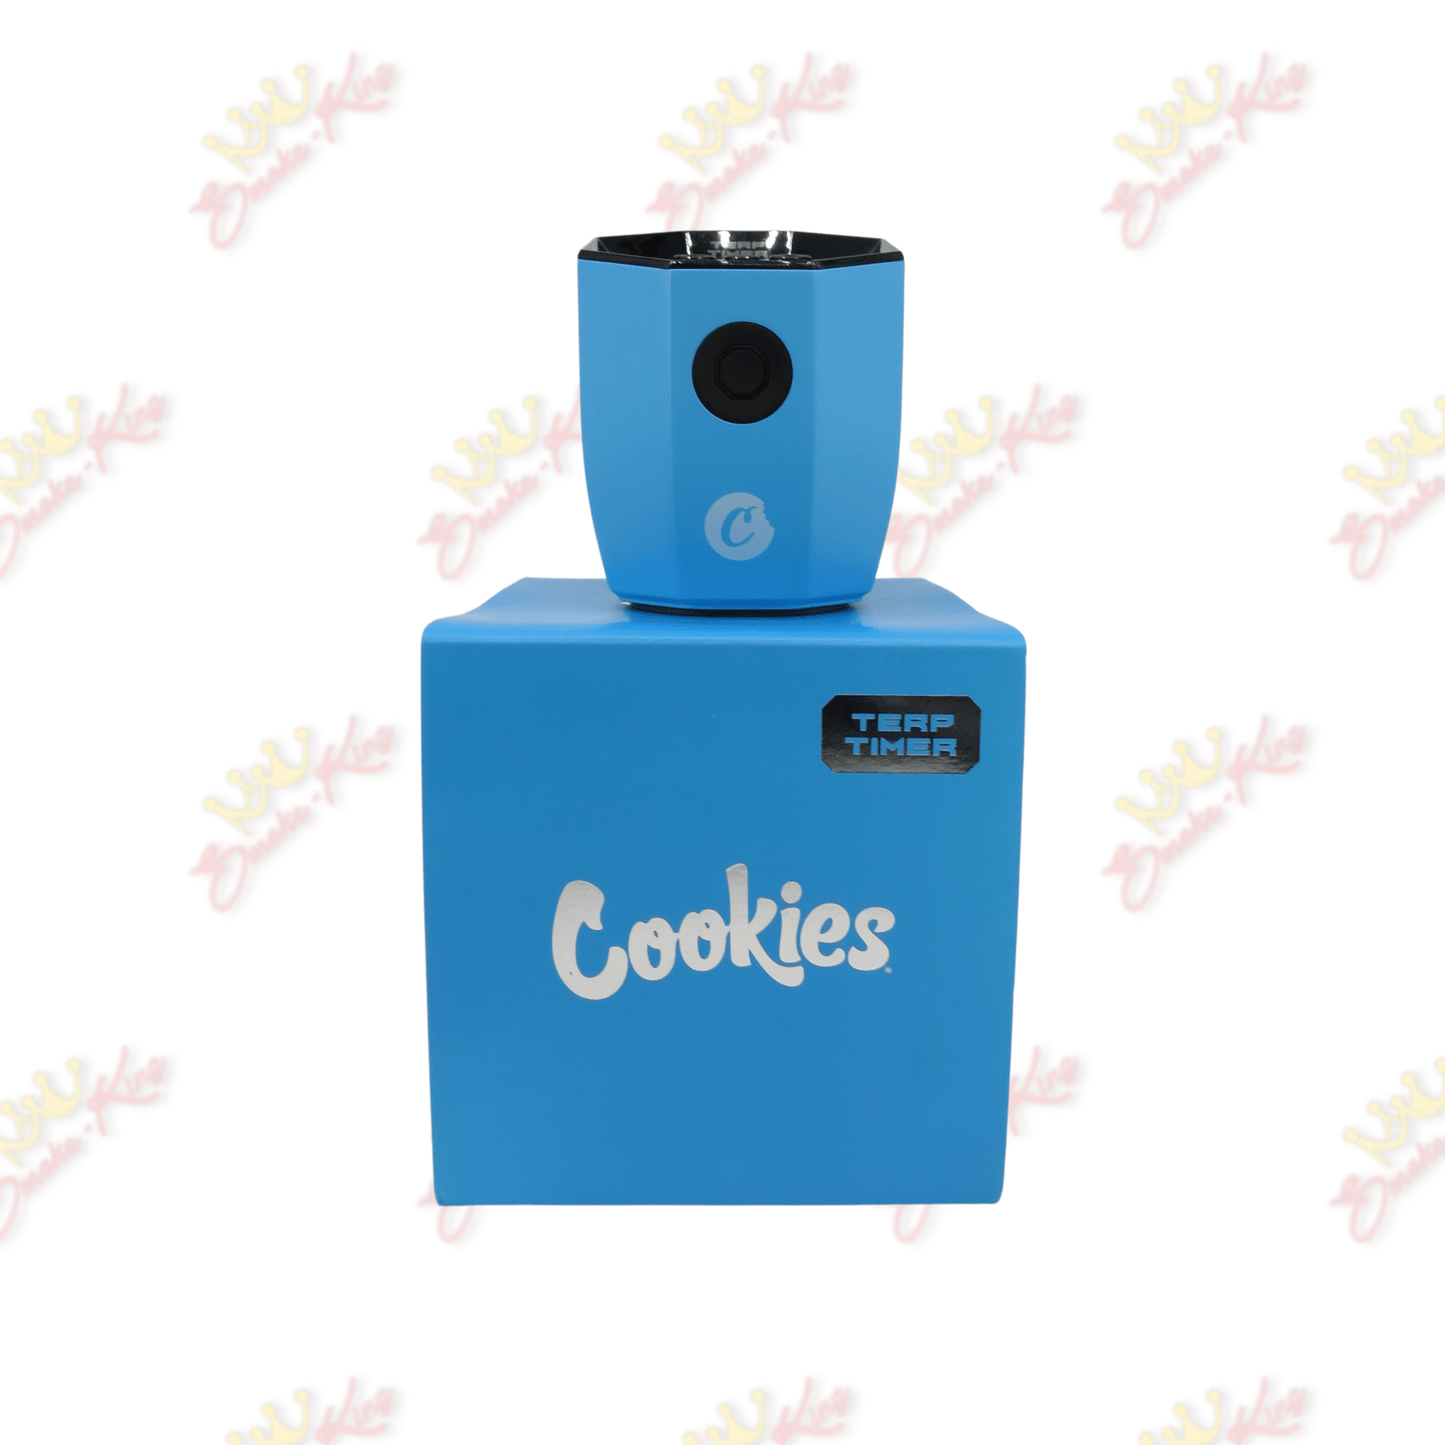 Cookies Terp Timer- OCTAVE